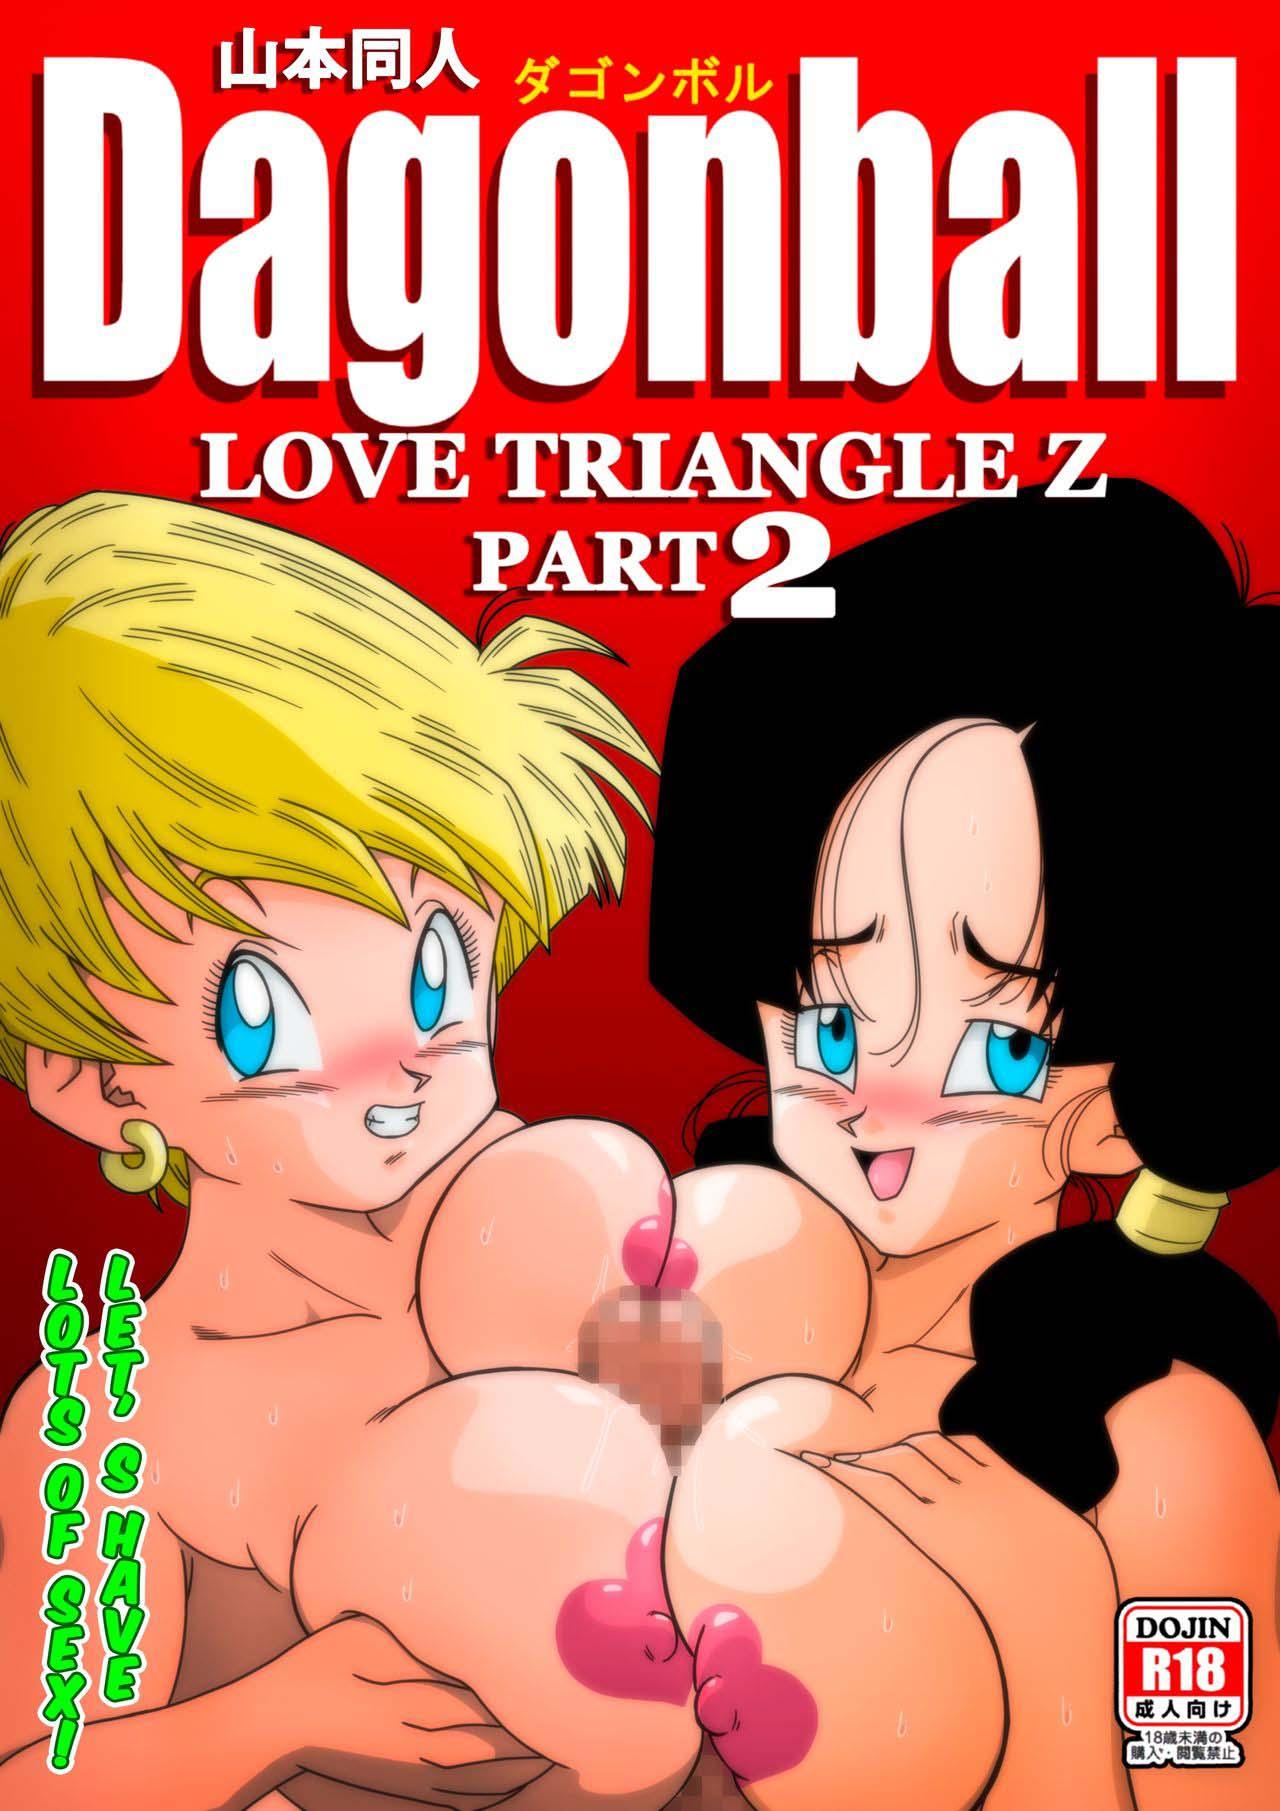 Pale LOVE TRIANGLE Z Part 2 - Dragon ball z Gay Massage - Page 1